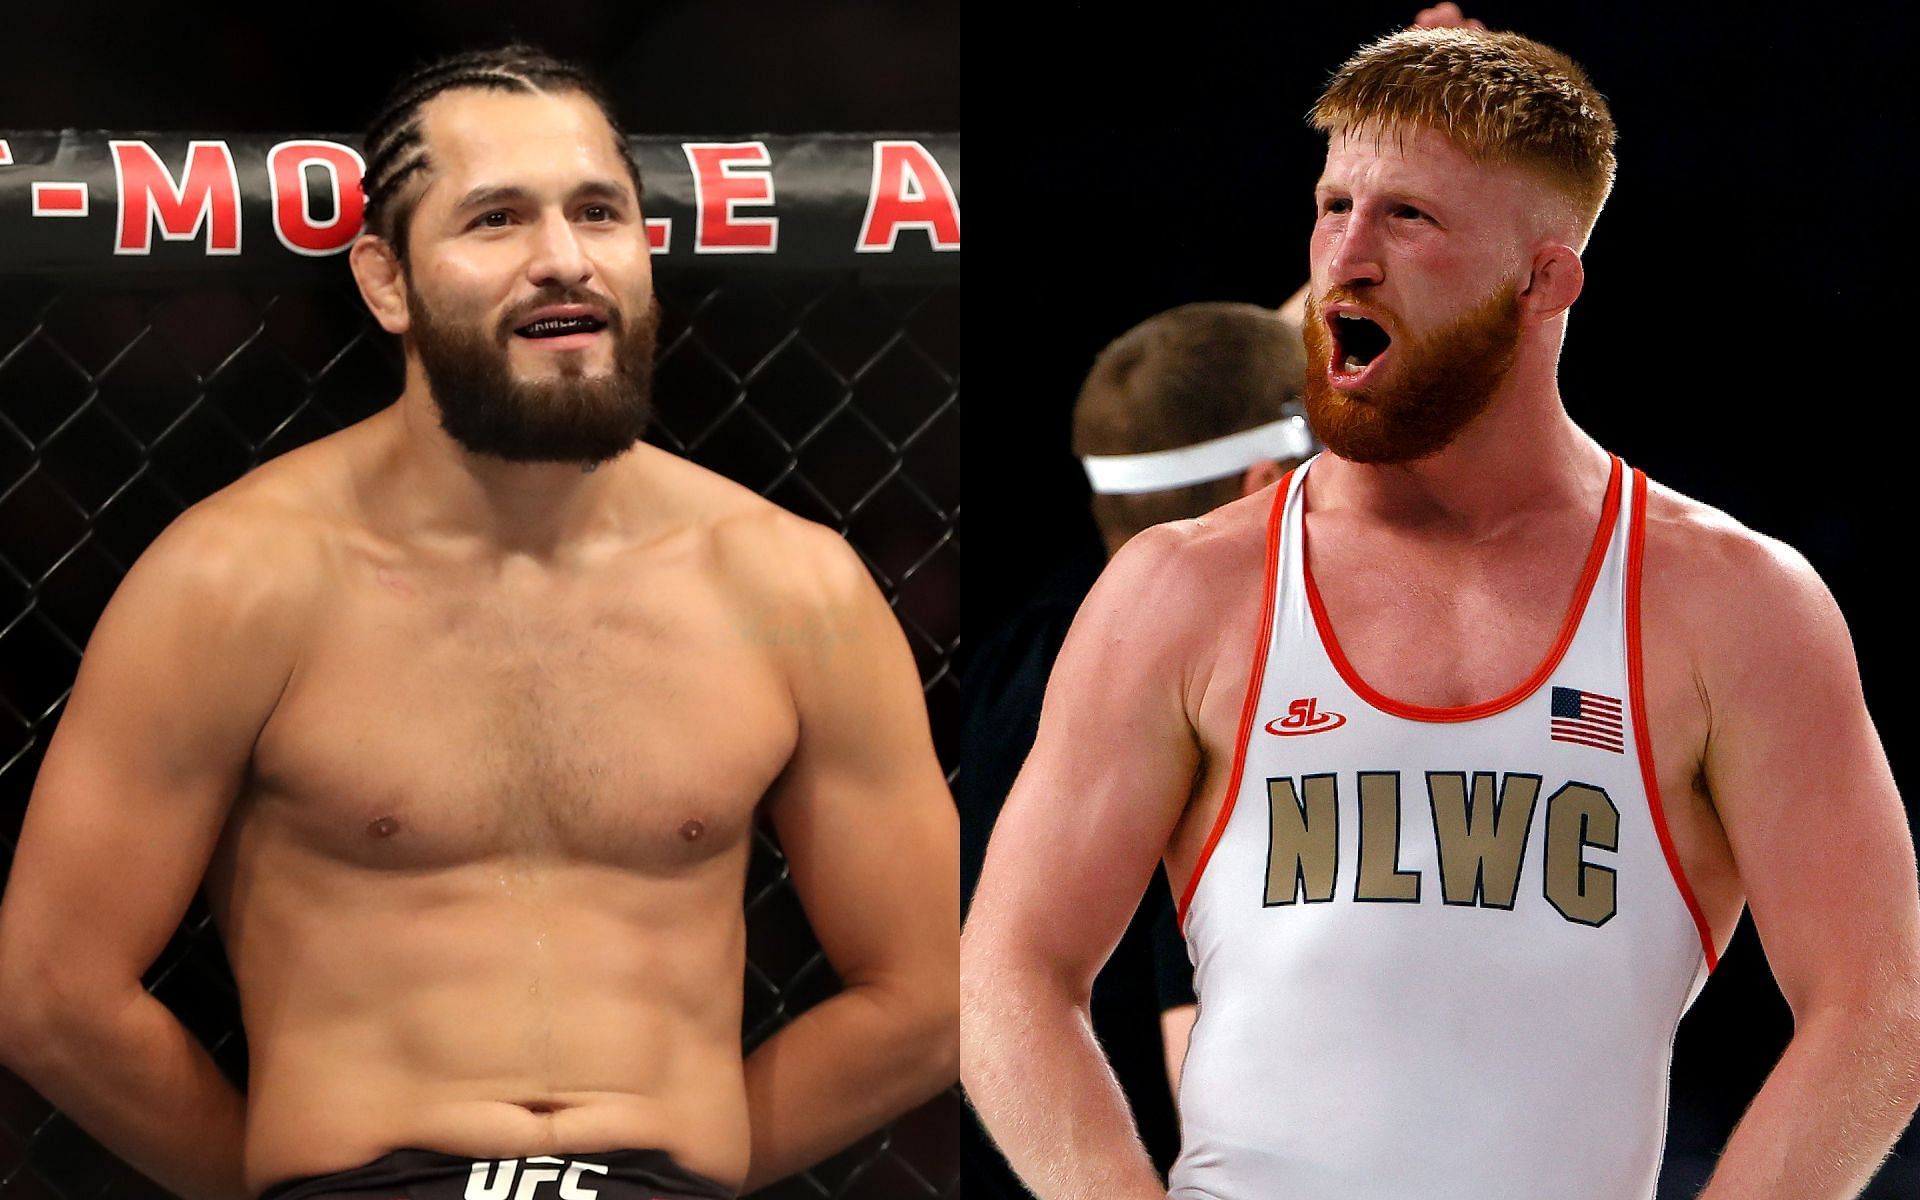 Jorge Masvidal (left) and Bo Nickal (right) (Images via Getty)